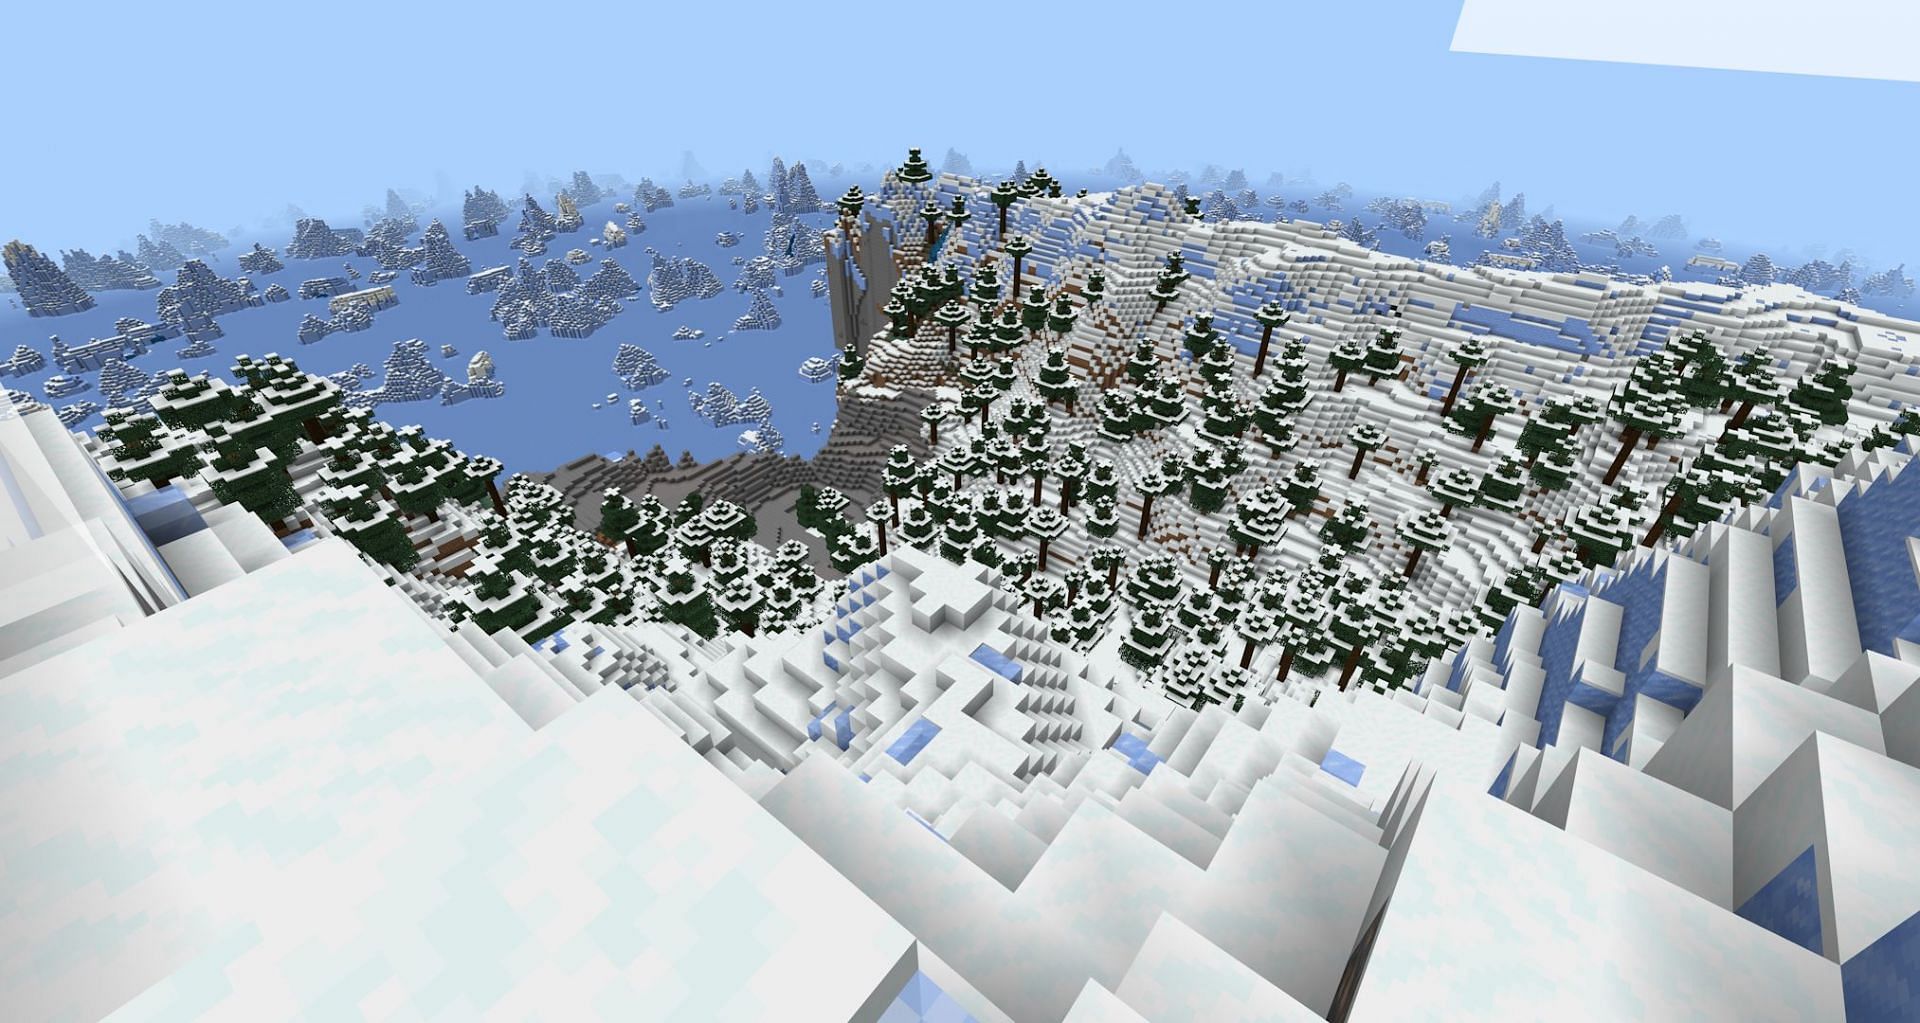 The view from spawn, over the frozen terrain (Image via Mojang)